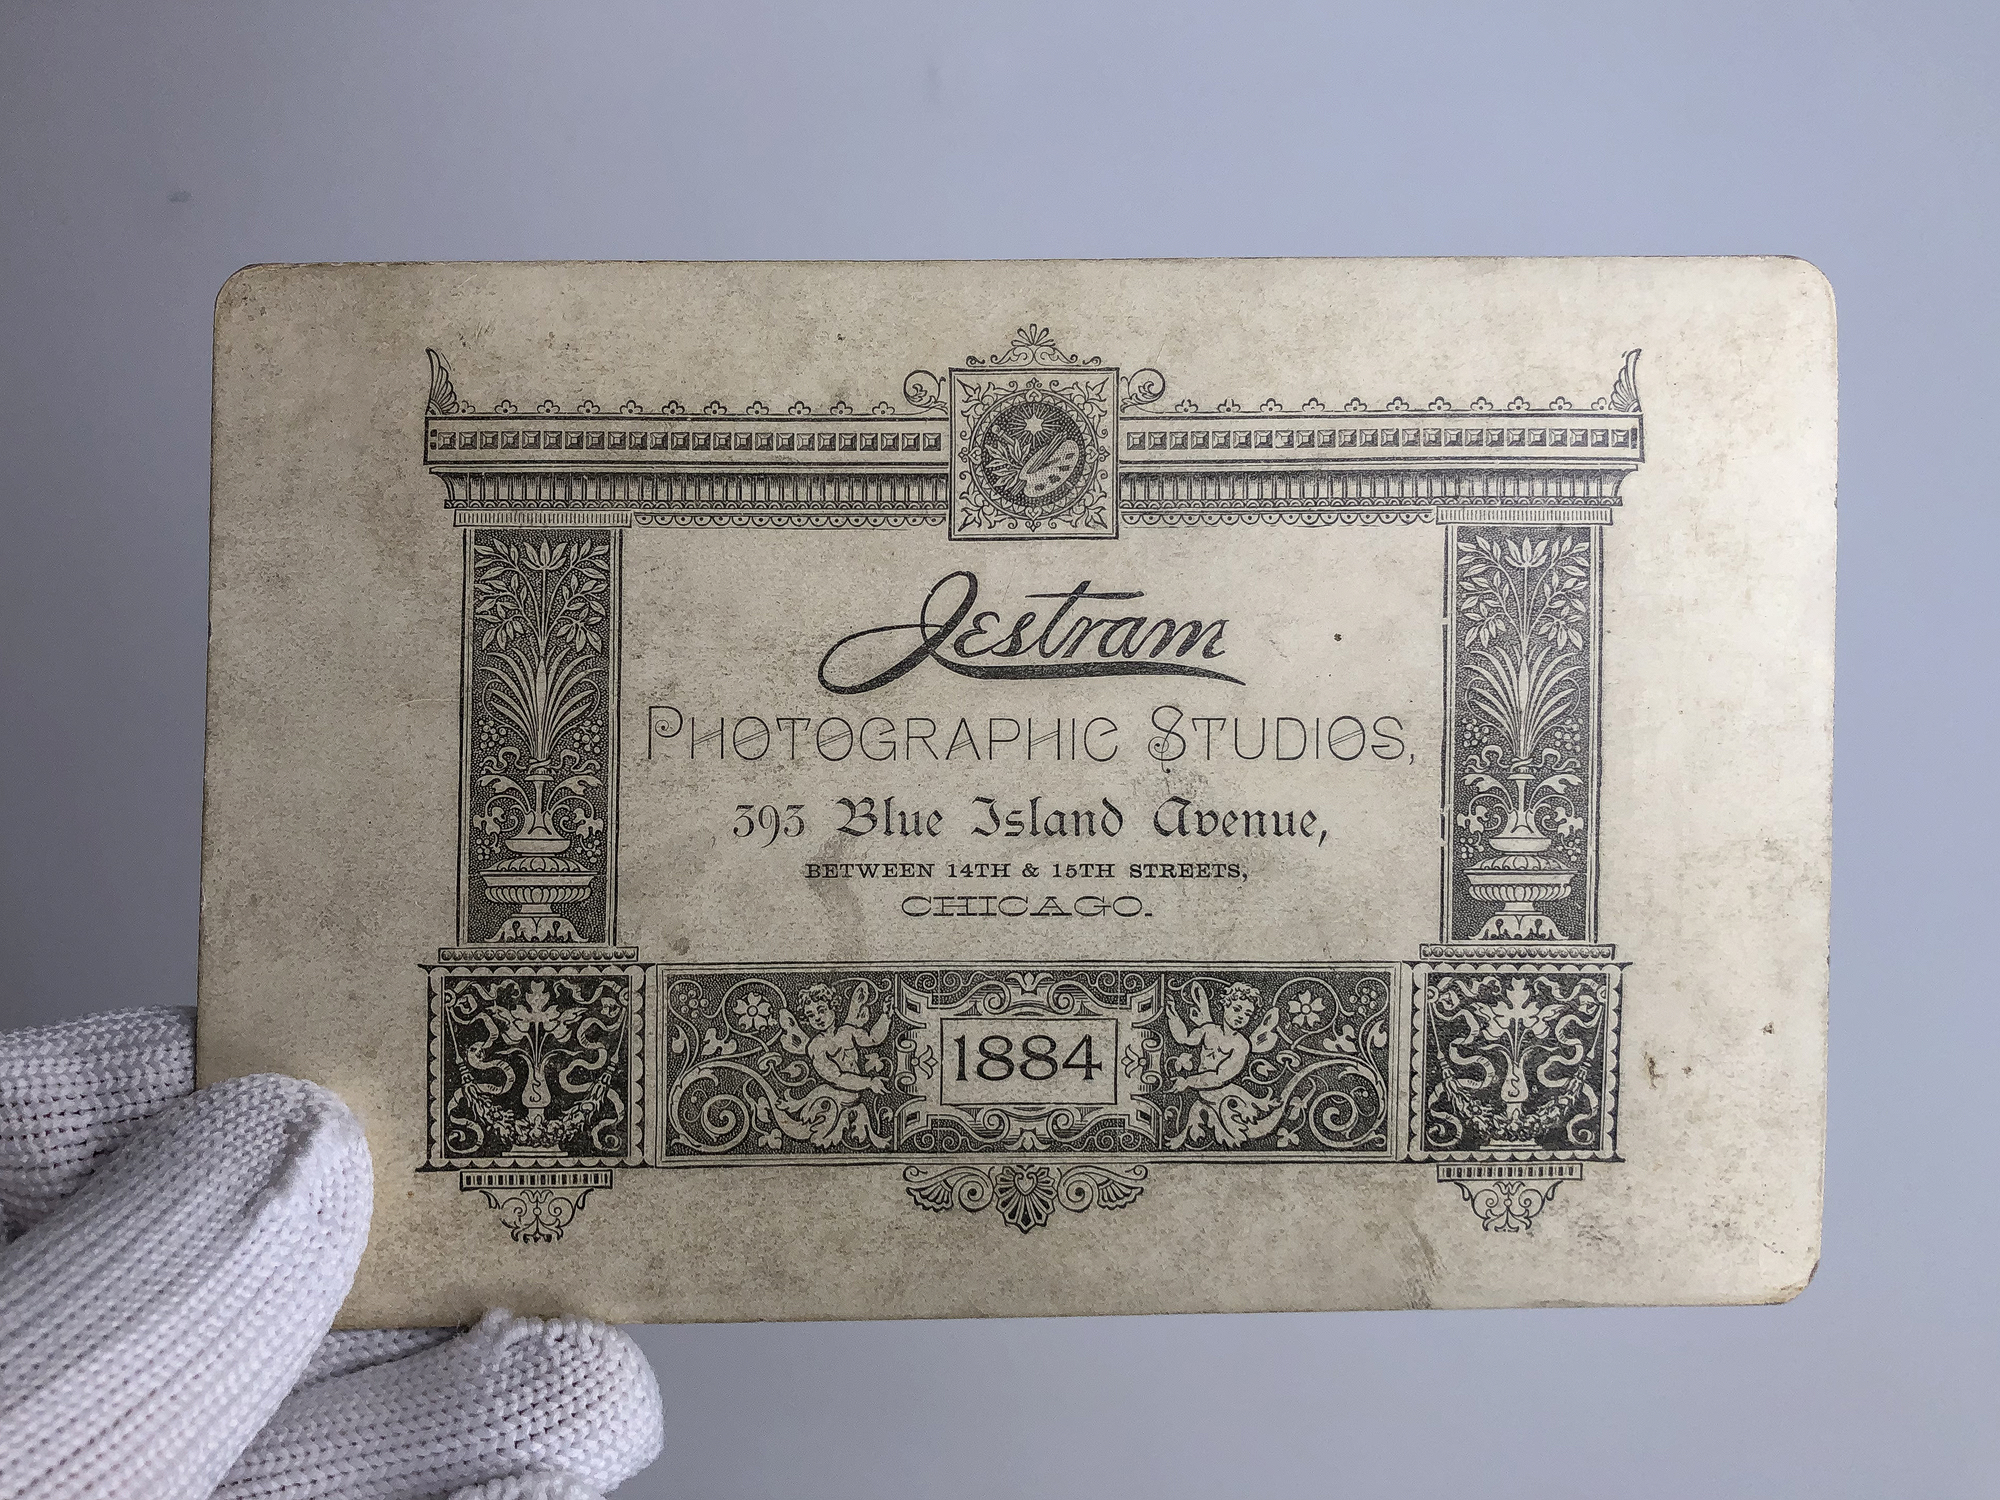 The imprint on the back of Henry Jestram's 1884 cabinet card says Jestram Photographic Studios, 393 Blue Island Avenue,
Between 14th & 15th Streets, Chicago. 1884